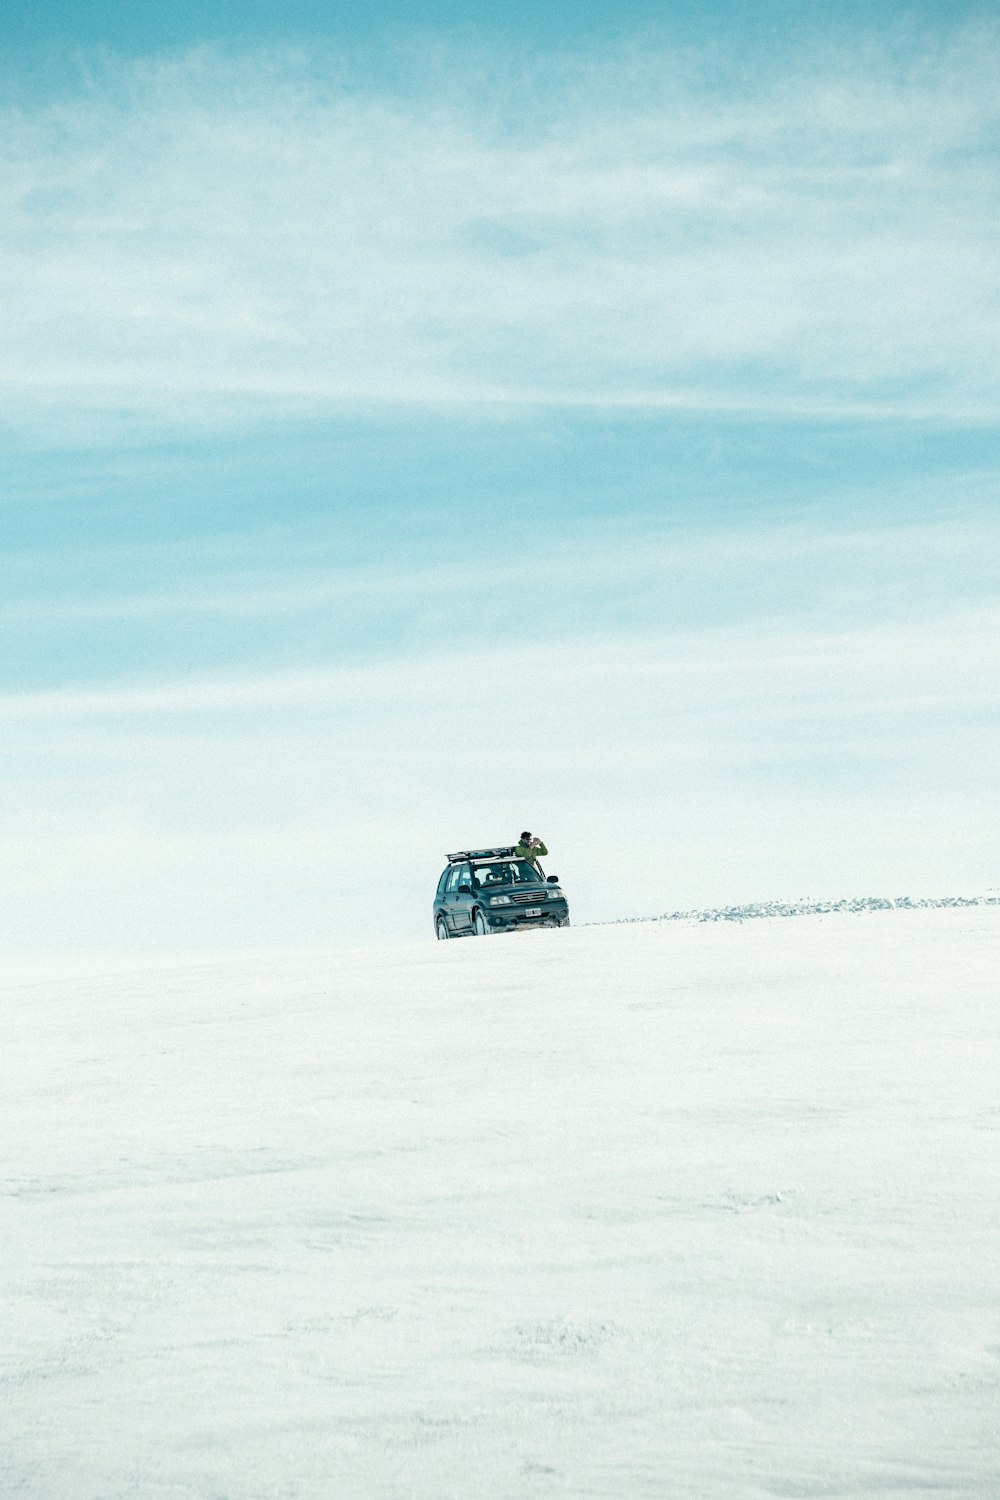 a vehicle driving through a snowy area